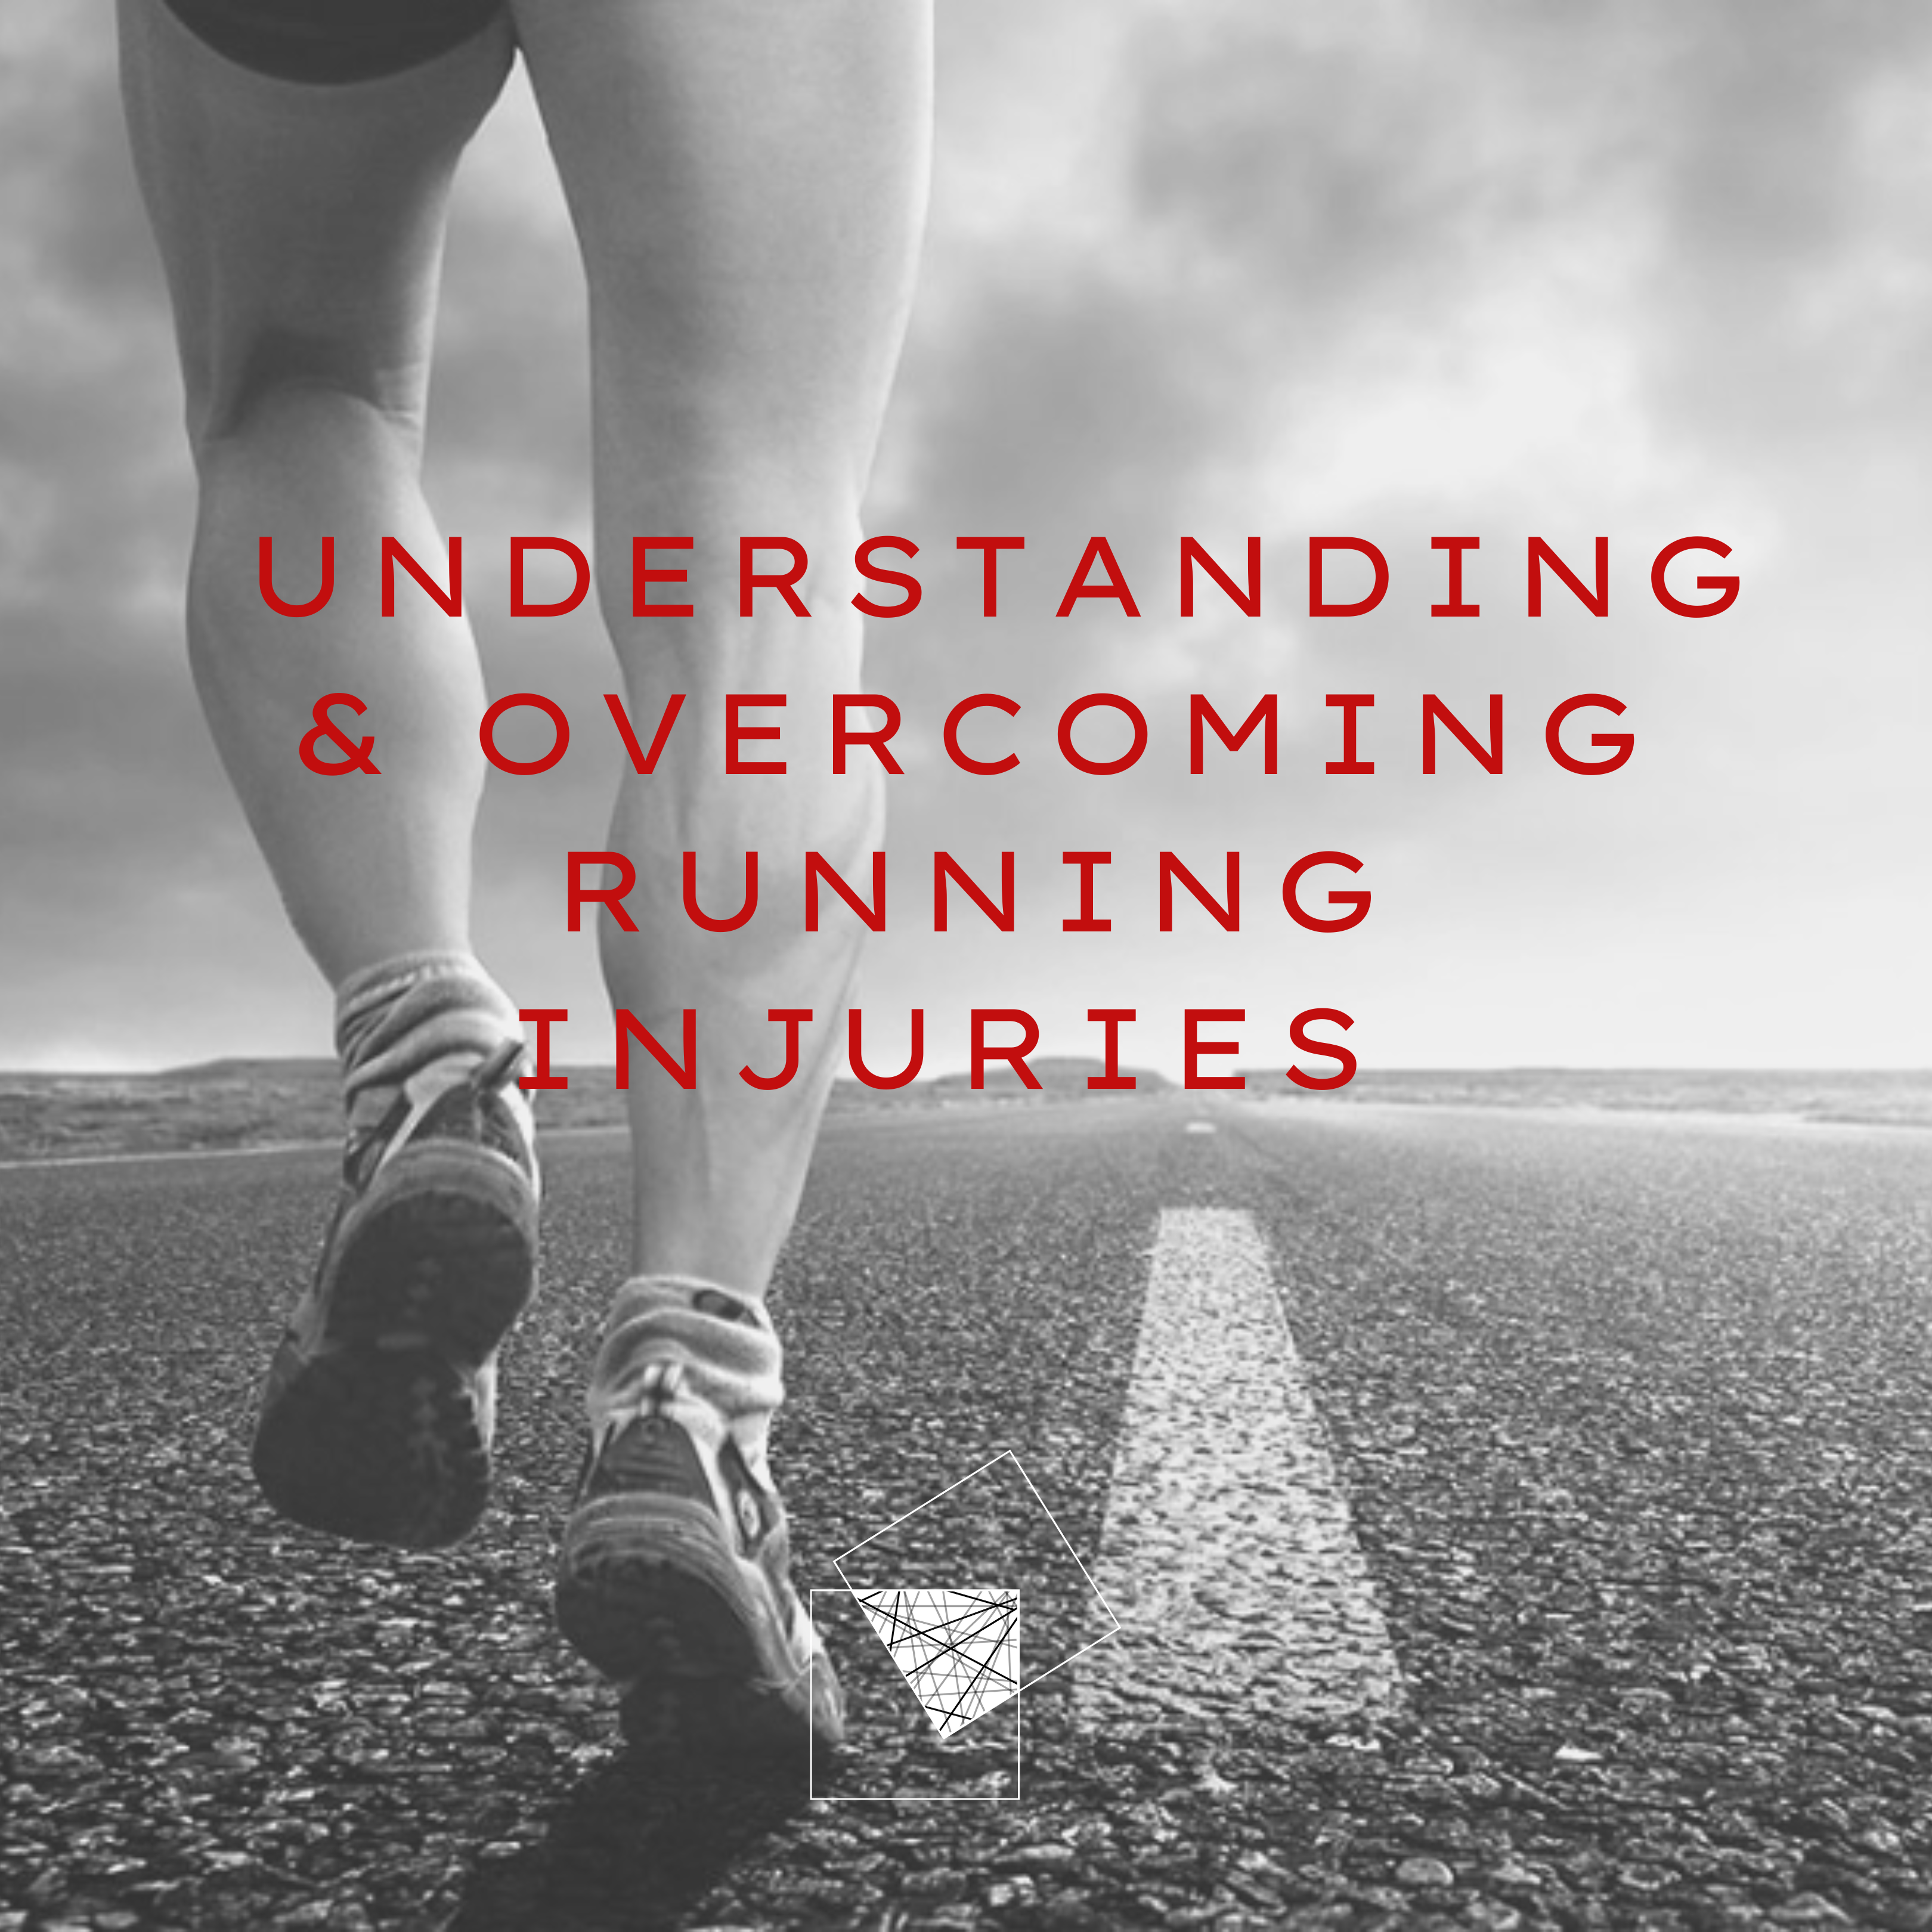 Greenville SC Running Physical Therapy for Running Injury